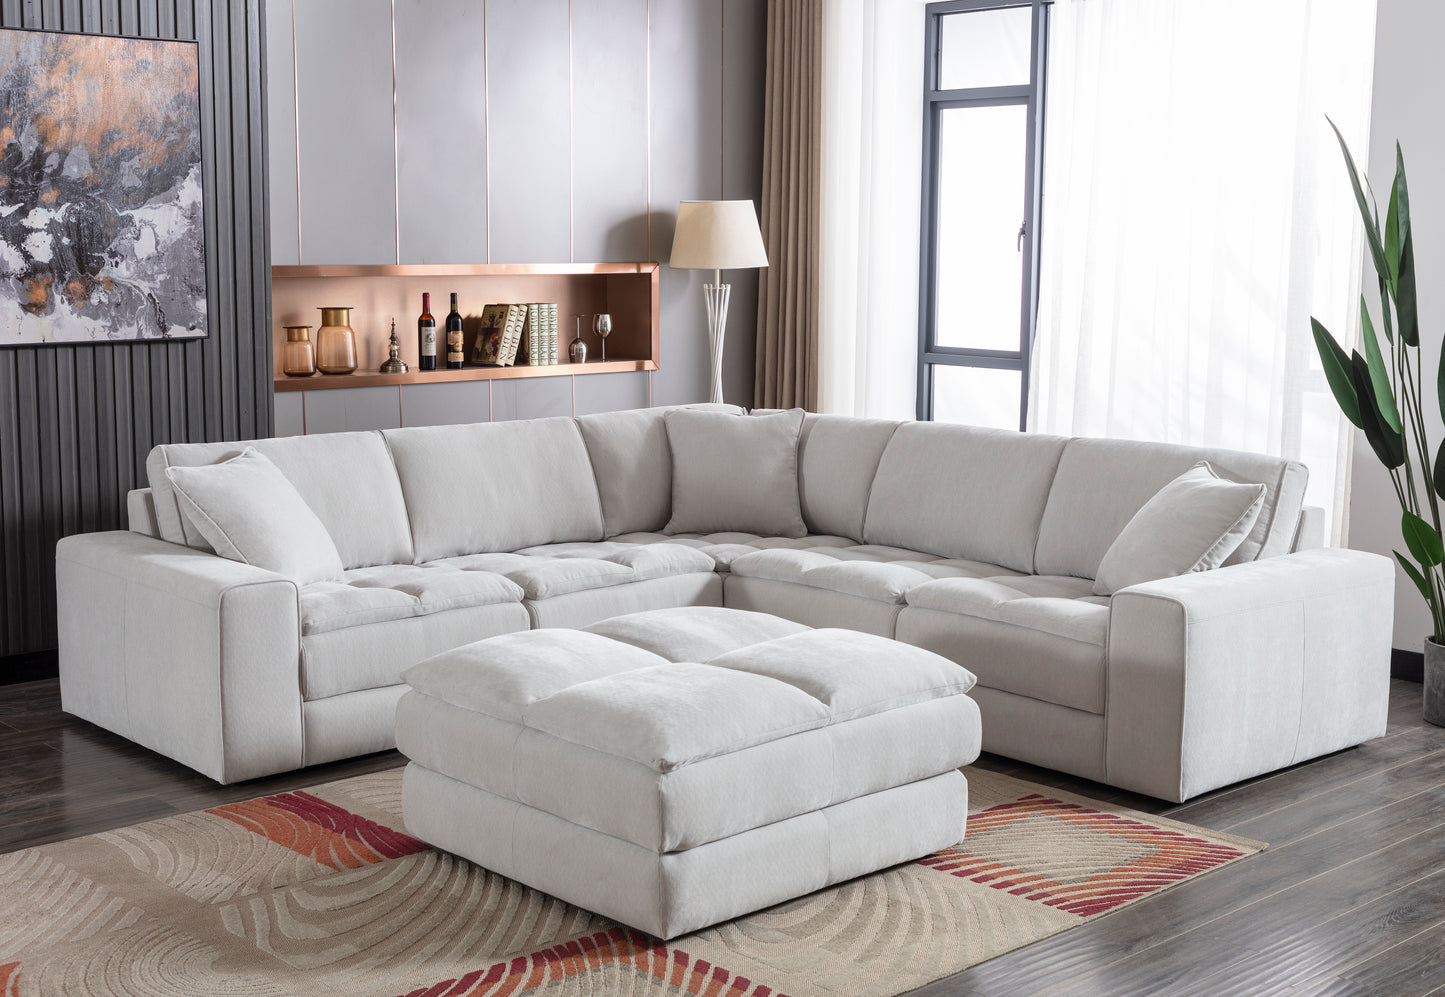 Breton Contemporary Fabric Tufted Modular Sectional Sofa Collection, Oyster